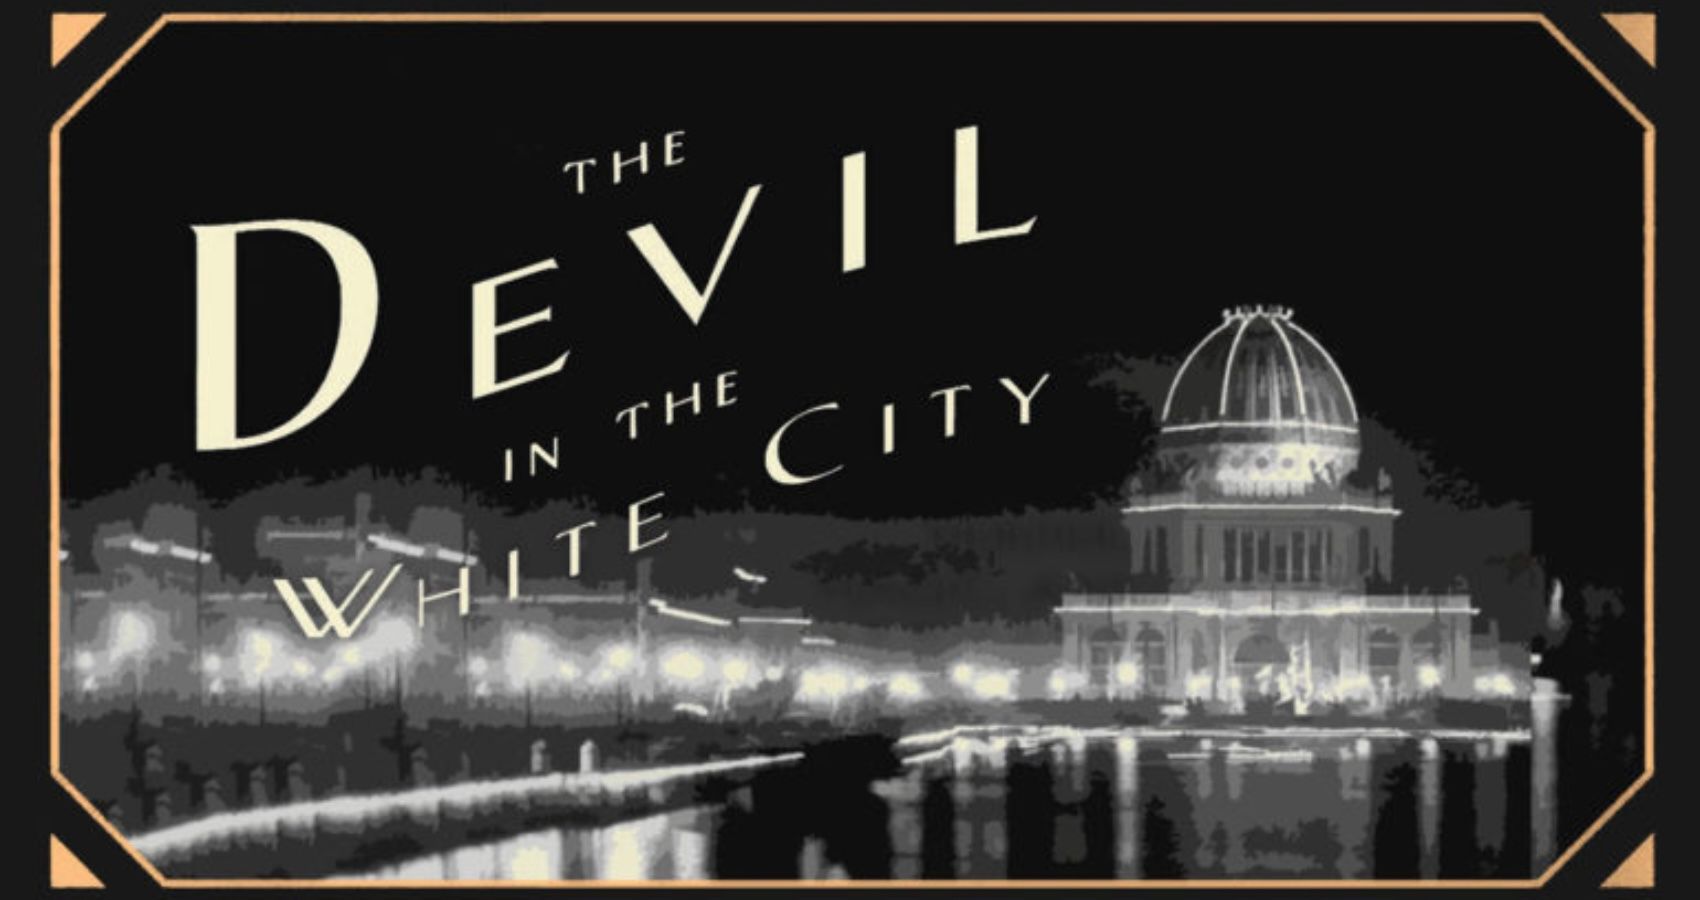 Everything About Devil in the White City: Plot, Cast, Crew & Cast, & Everything Else